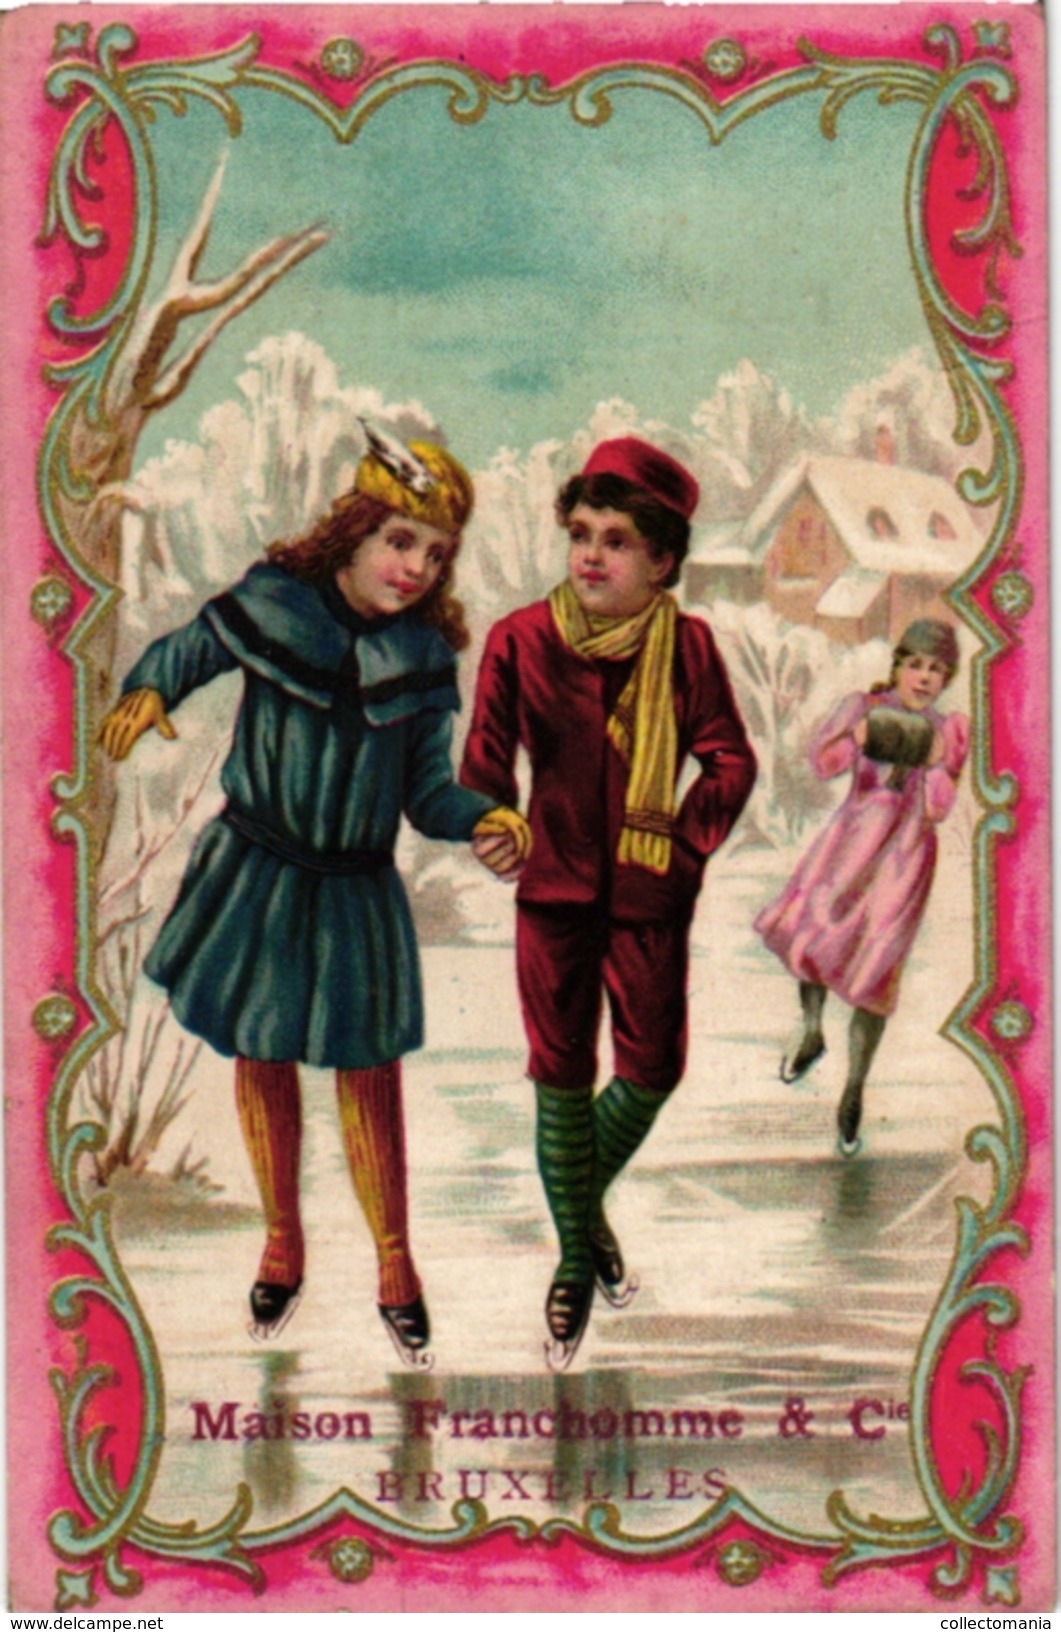 8 Cards Ice-Skating Patinage Sur Glace Eislaufen PUB  Choc Marchal Brux Franchomme Brux Belle Jardiniere Dalma Chartres - Invierno